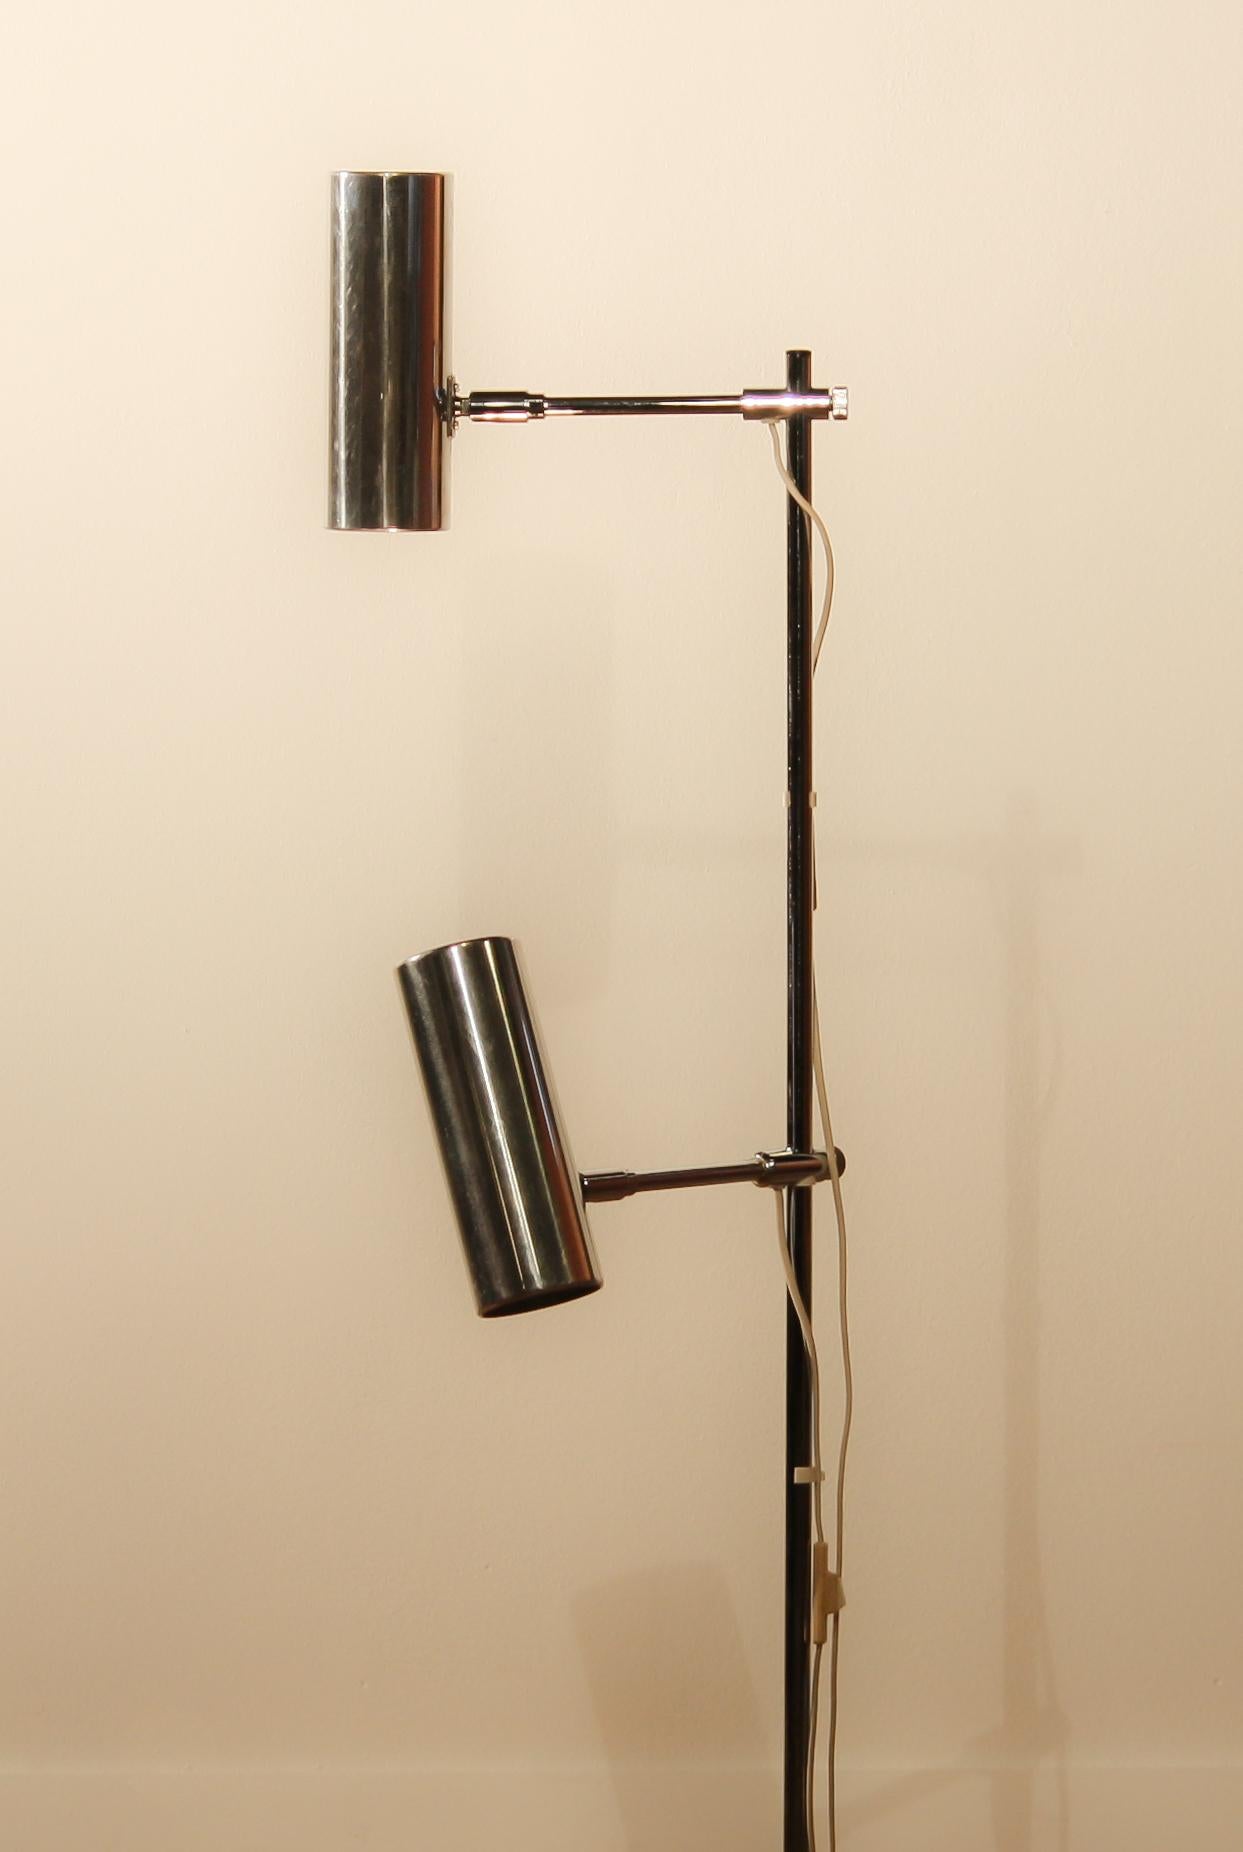 Beautiful floor lamp made by Bergboms scan light AB Sweden.
This lamp has two lights.
The lampshades are made of aluminum and the stand is made of chromed steel.
It is in a nice working condition.
Period 1960s.
Dimensions: H 112 cm, ø 23